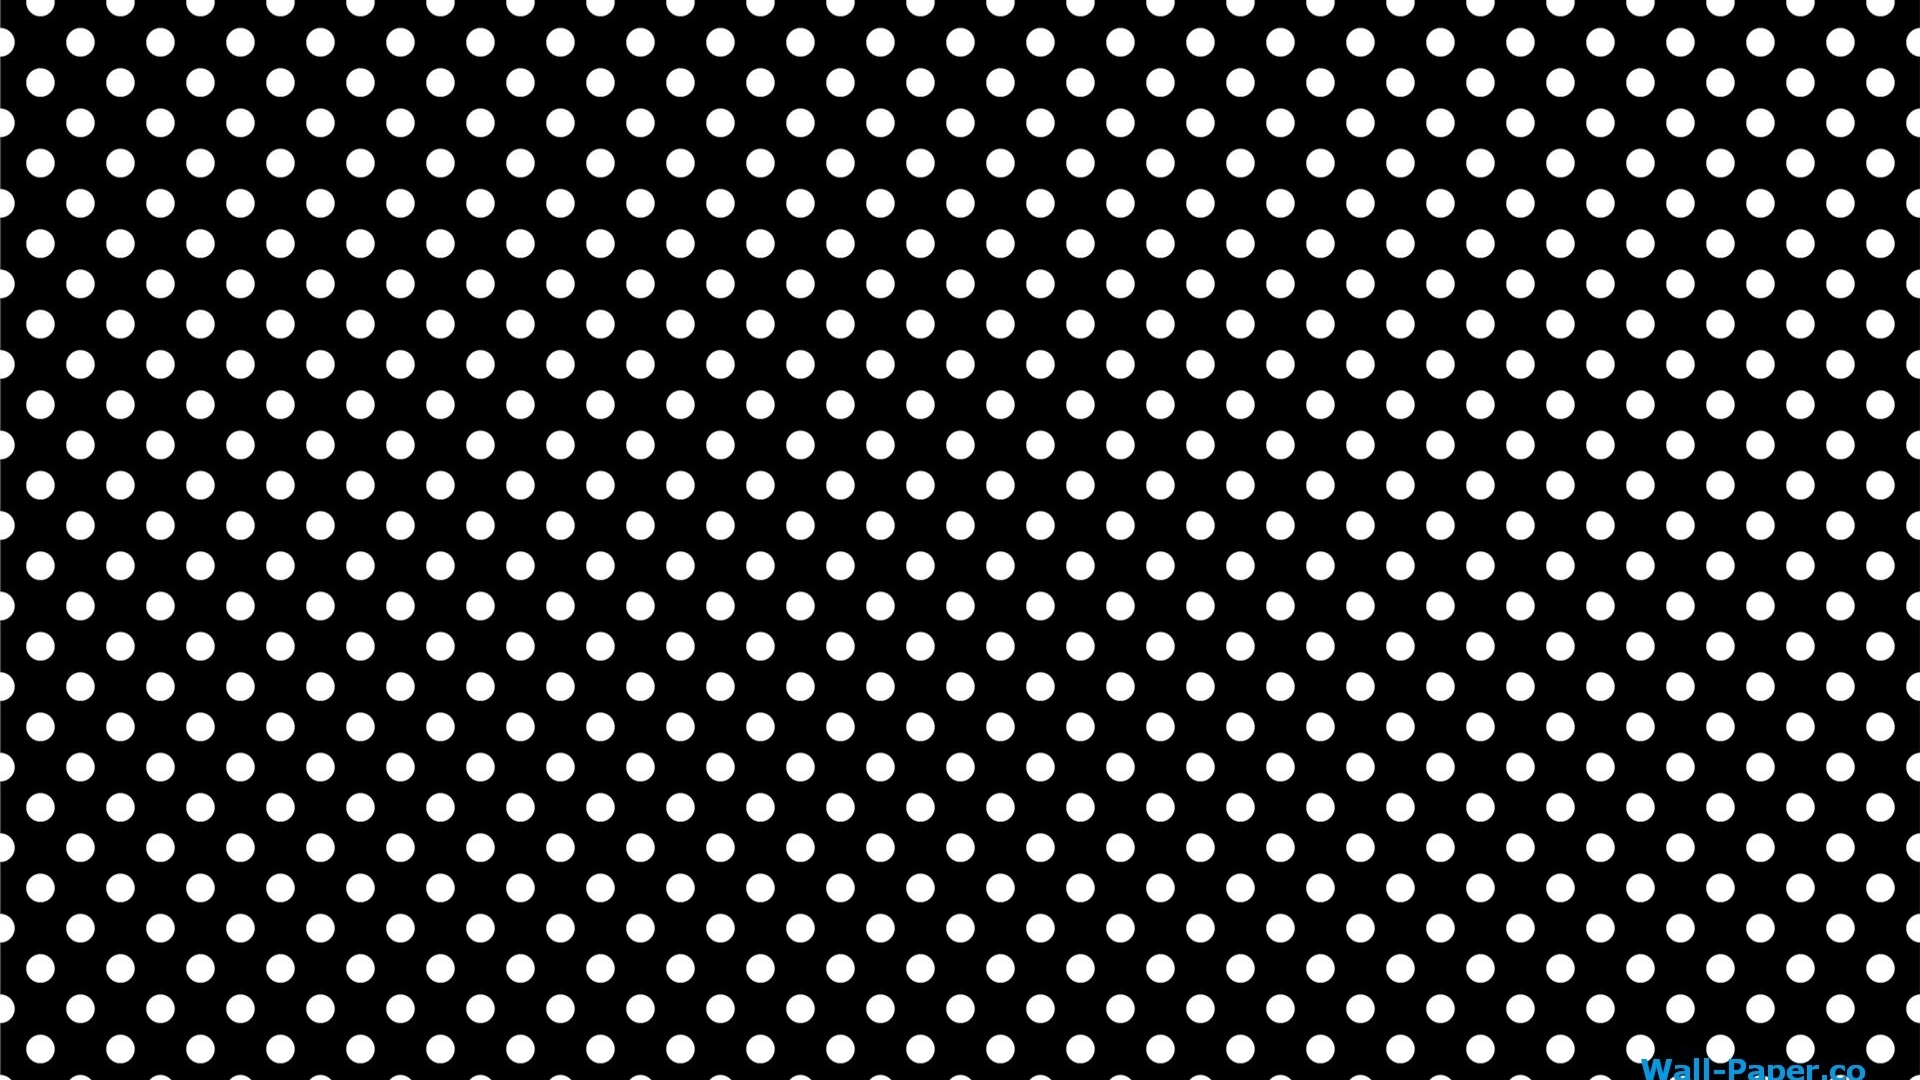 White dots on black background wallpaper in Textures wallpapers 1920x1080